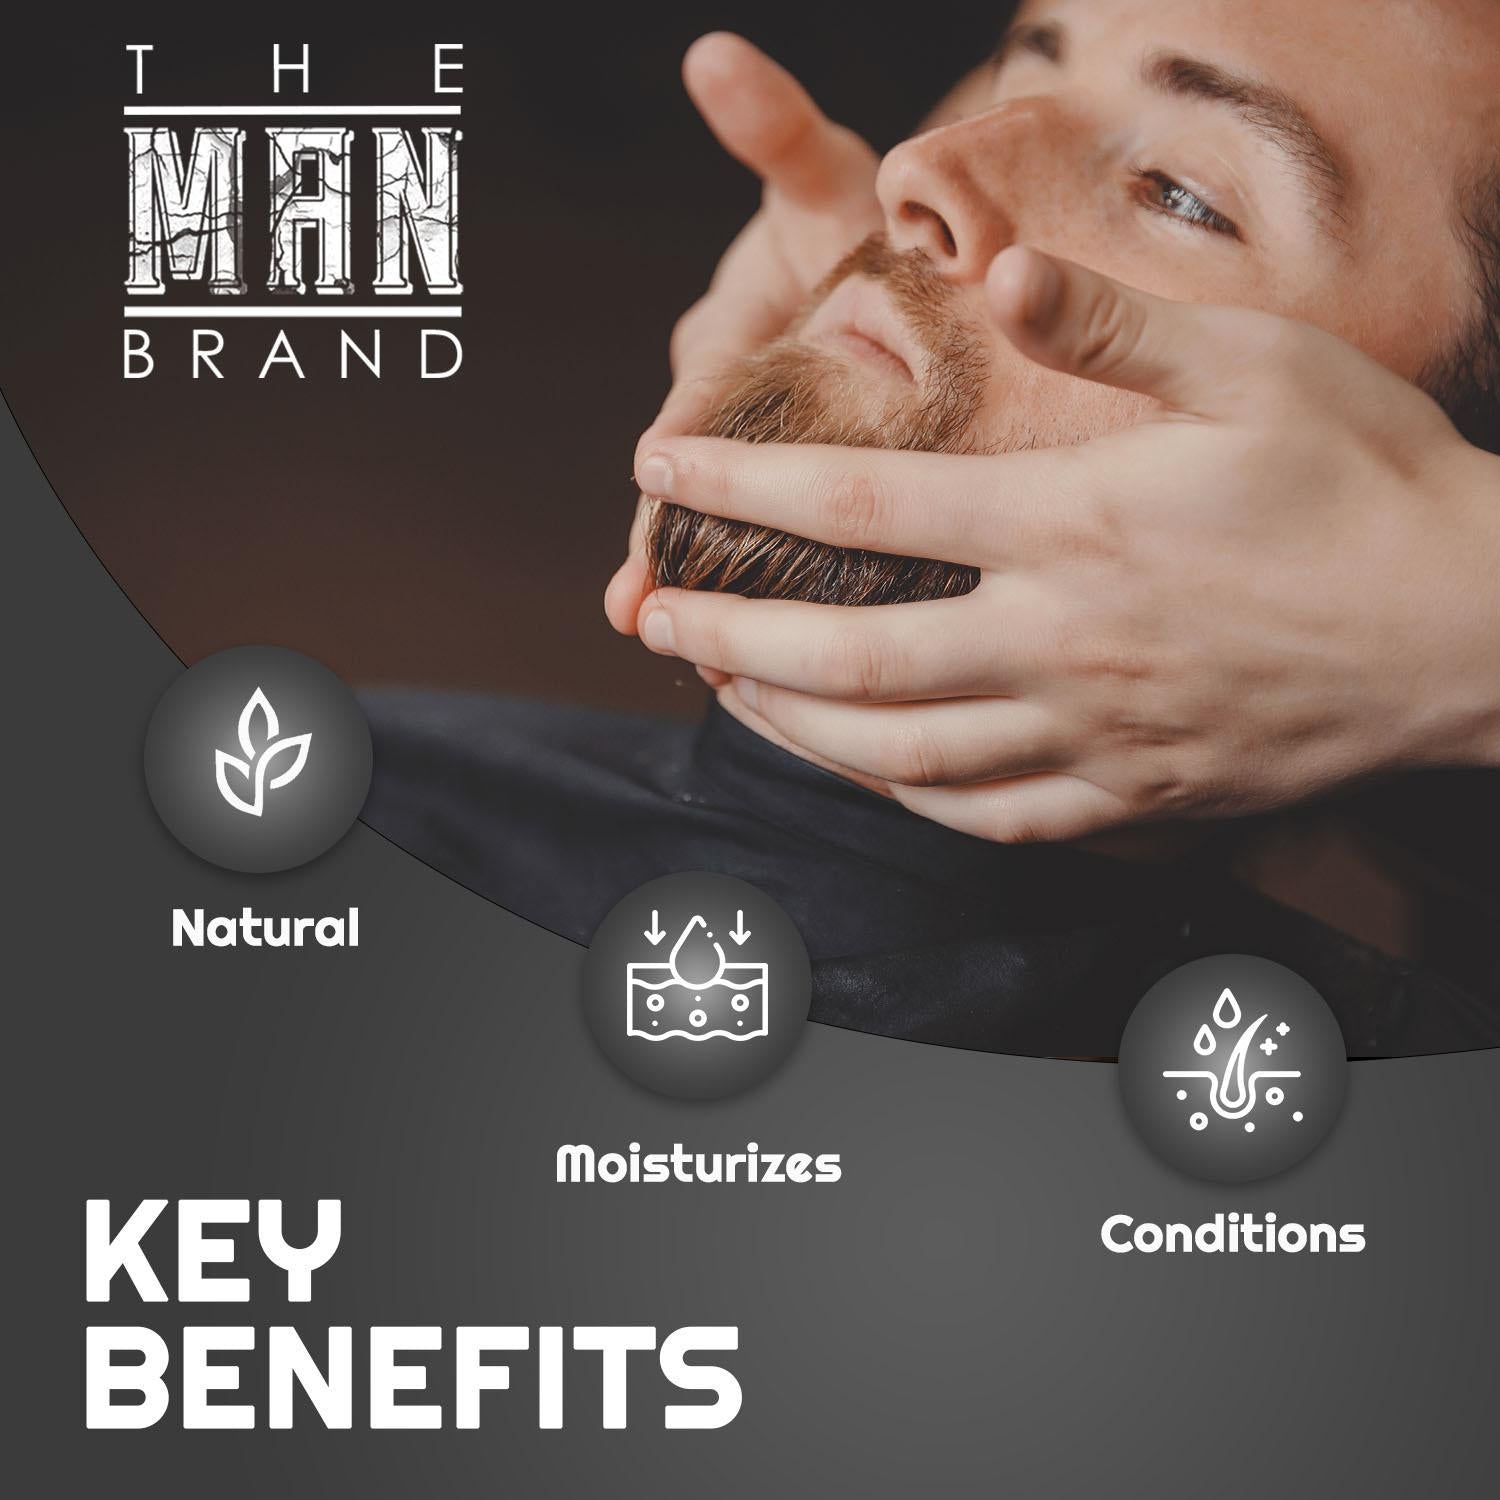 The Man Brand's Beard Conditioner For Men - Castor Oil Beard Conditioner For Frizzy Beards - Scented Beard Conditioner With Avacado Oil